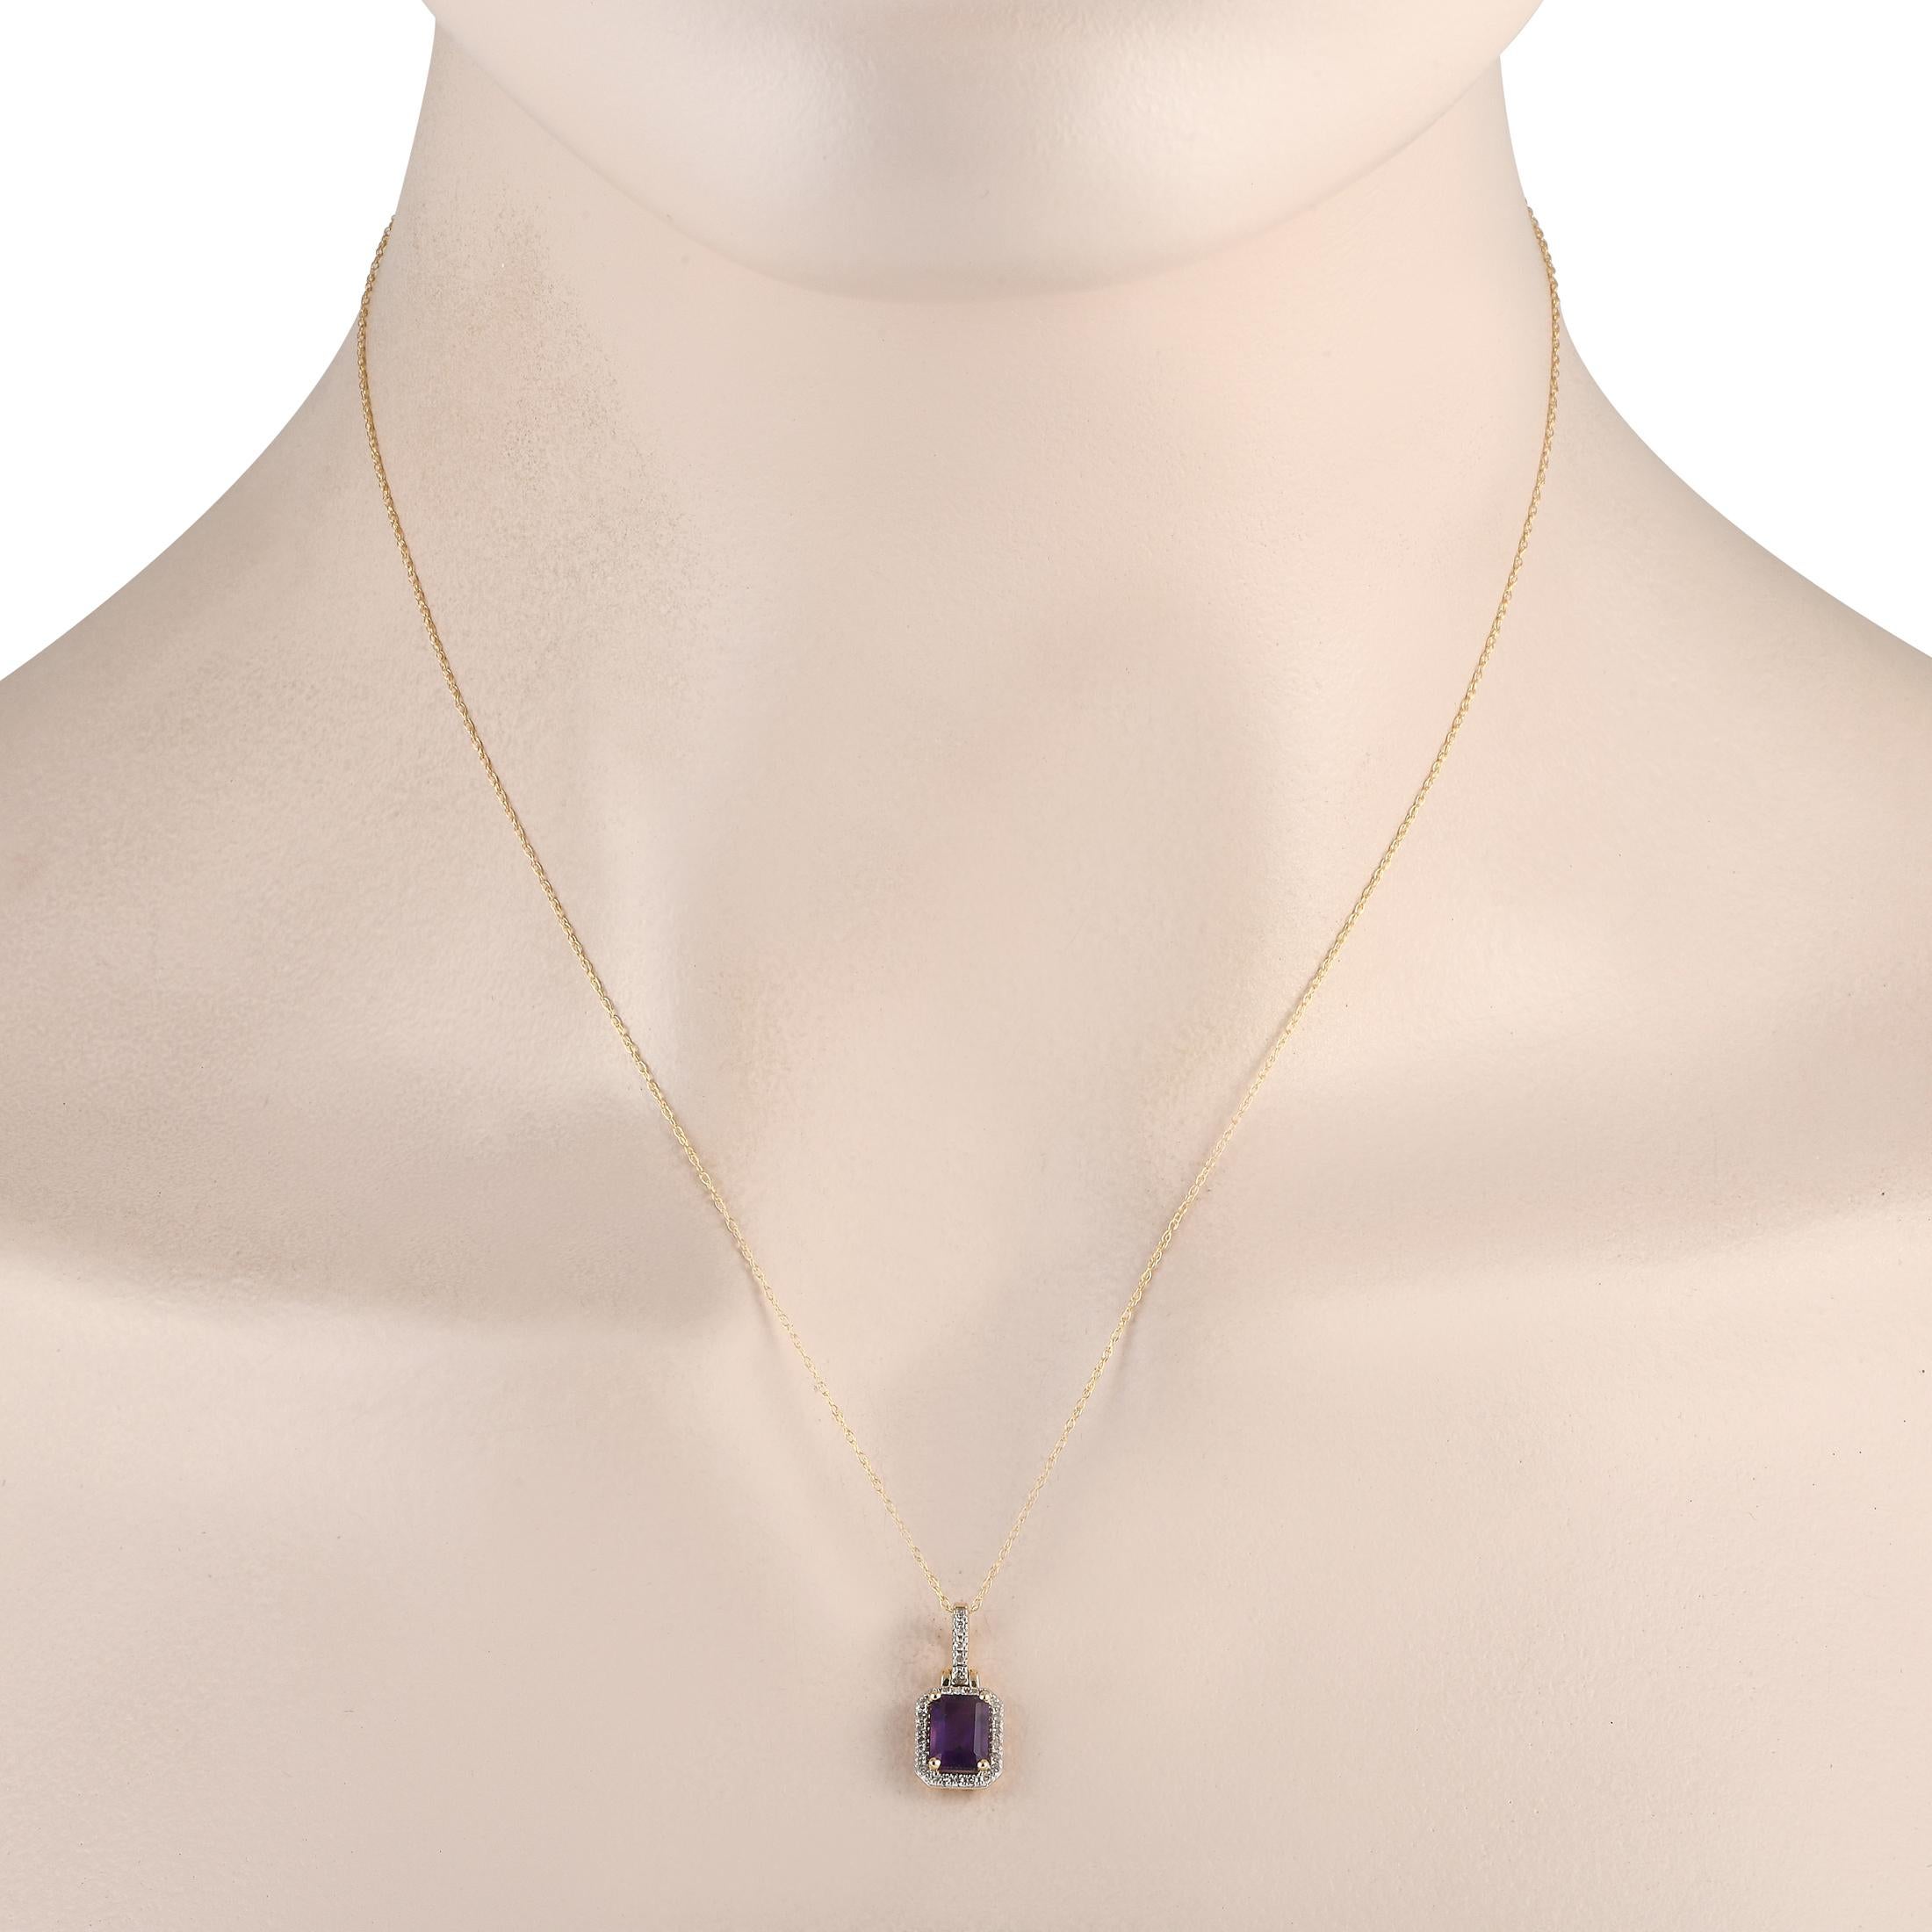 A breathtaking Amethyst gemstone serves as a stunning focal point on this exquisite necklace. Crafted from 14K Yellow Gold, it features a sophisticated pendant measuring .65 long by 0.30 wide. Its suspended from an 18 chain and includes an array of